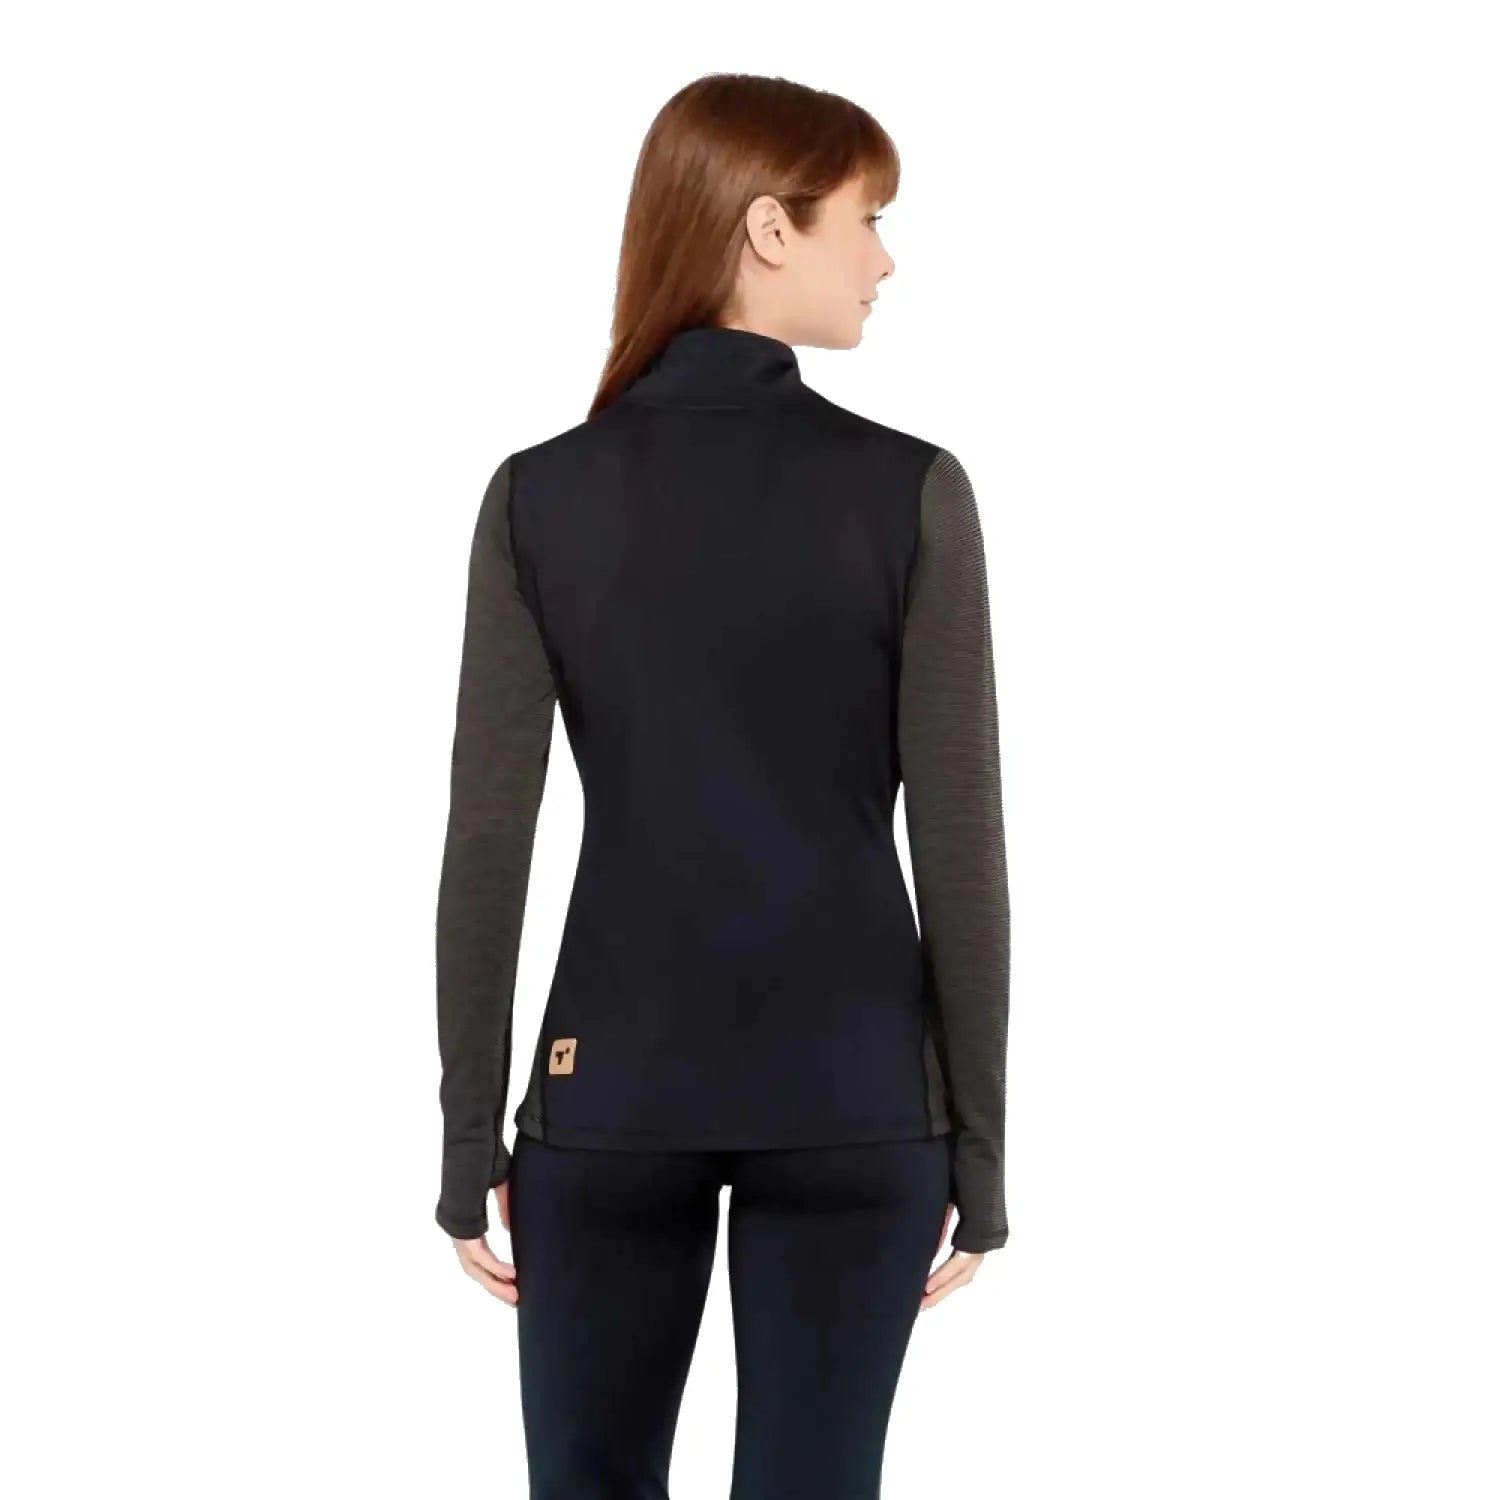 Terramar Women's C-Suite Fusion Full Zip Thermal Shirt shown on model in the Brindle Black color option. Back view.